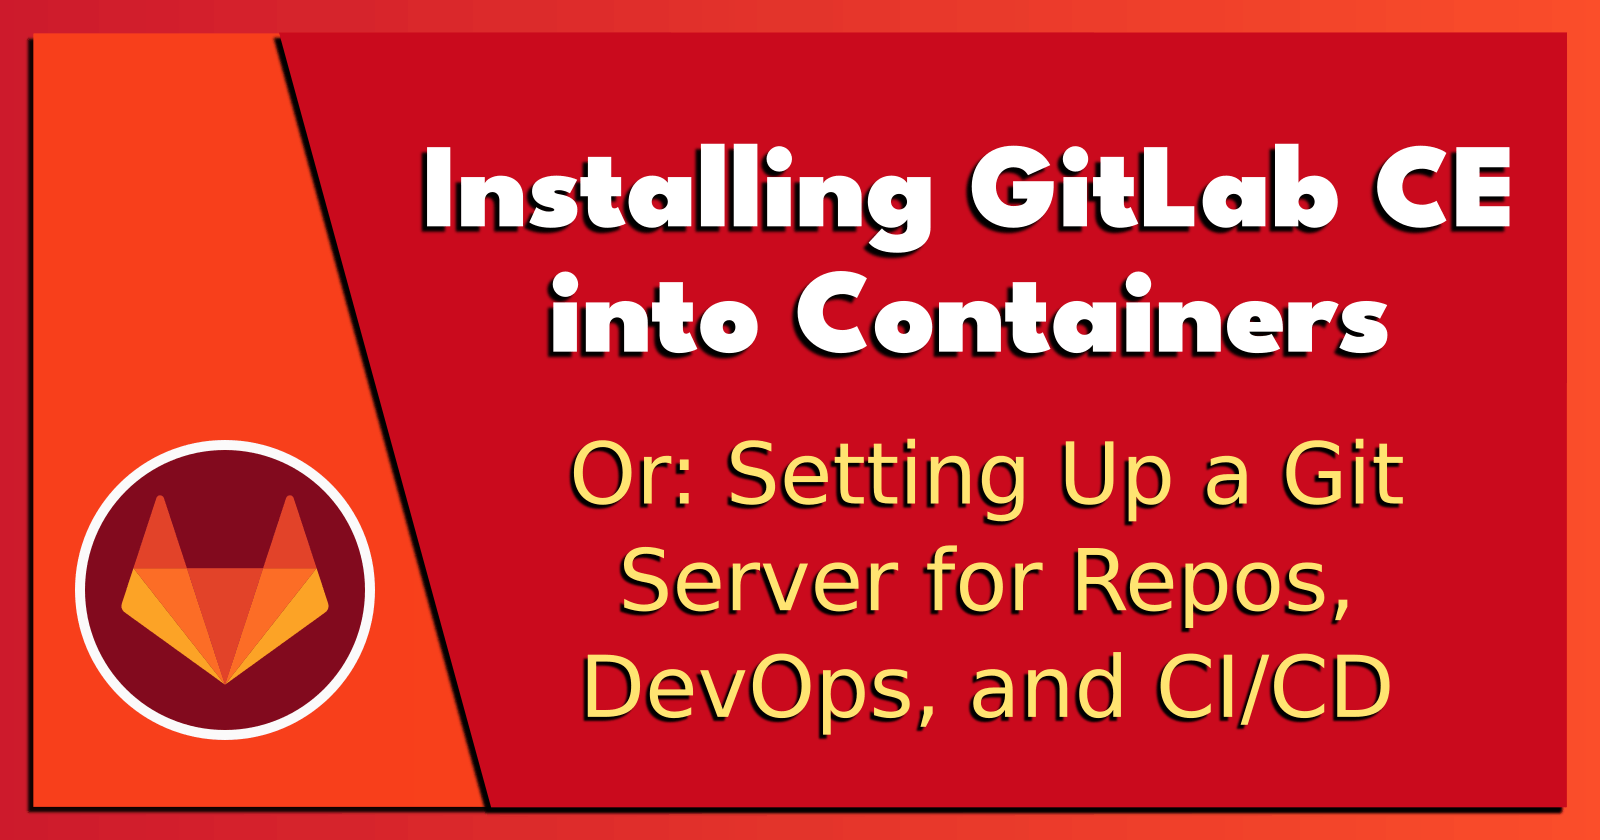 Installing GitLab CE into Containers.